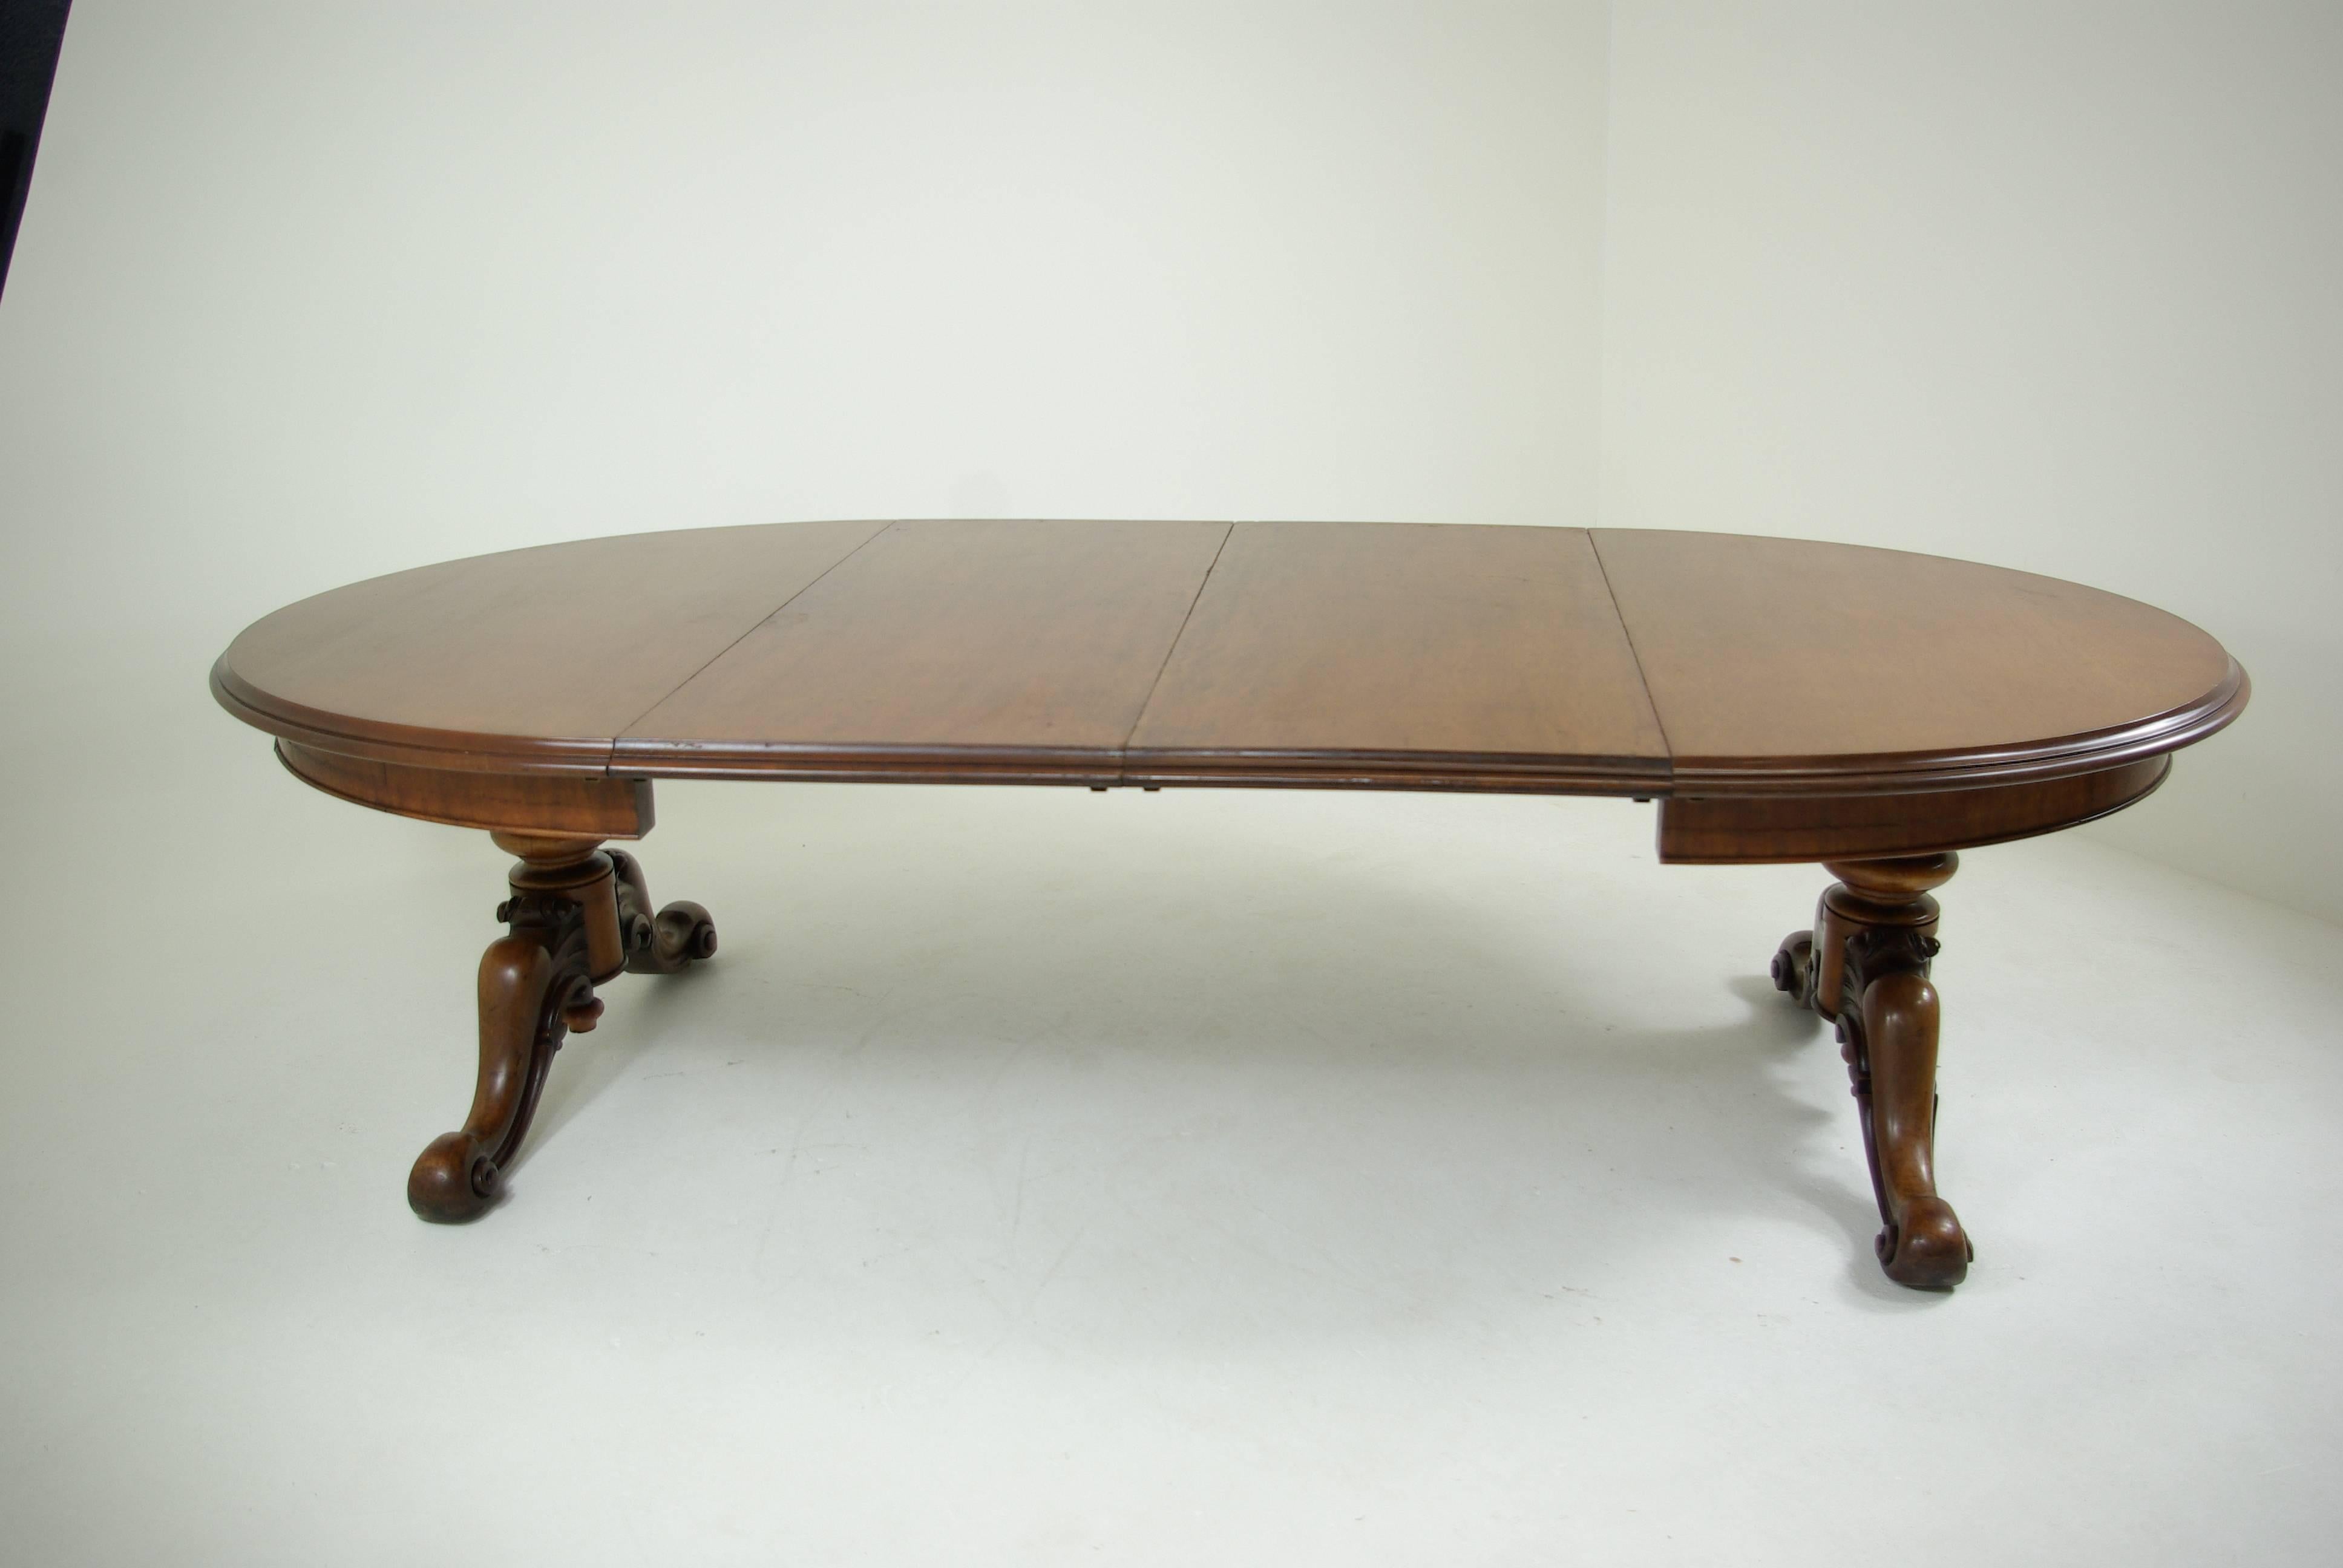 Mid-19th Century B305 Antique Scottish Oval Mahogany Dining Table, Carved Pedestals, 2 lg. Leaves